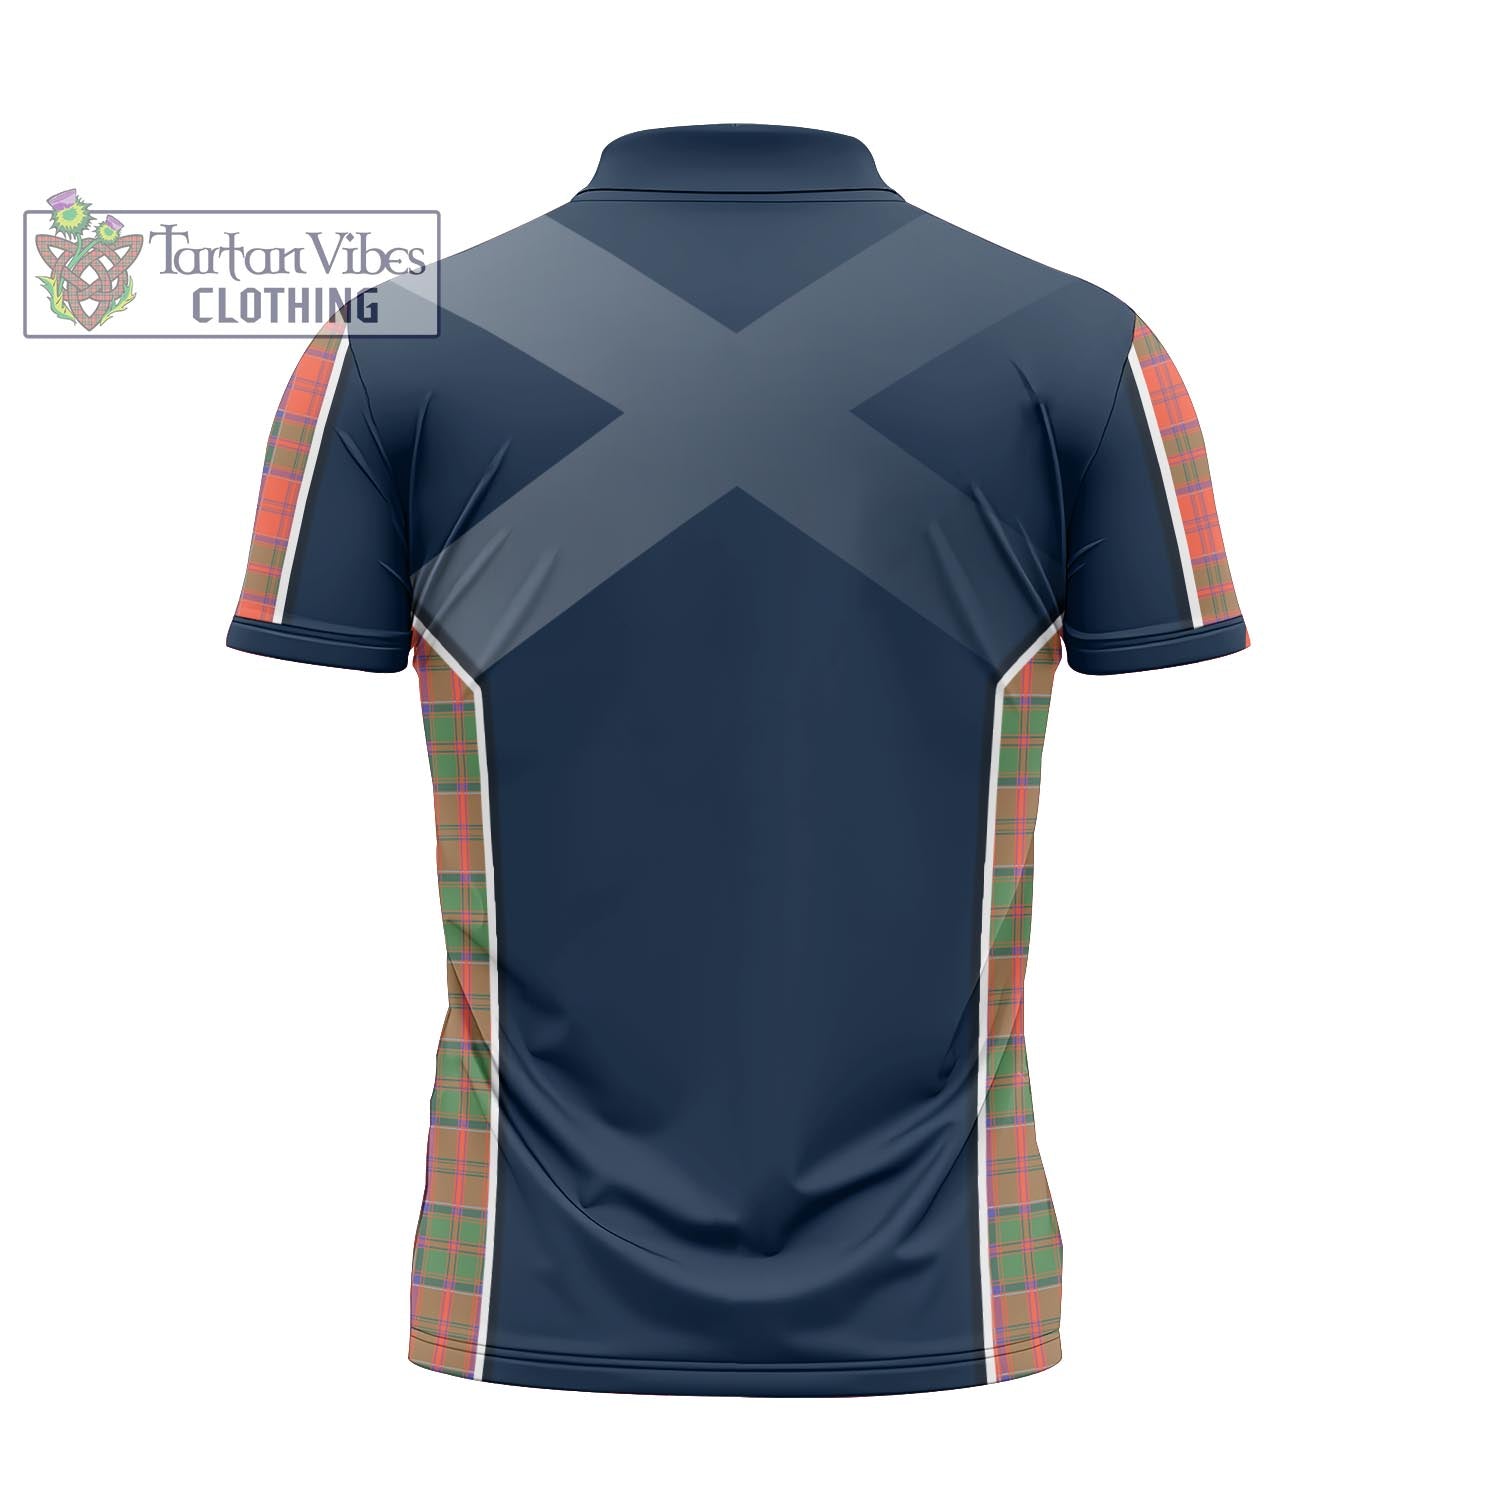 Tartan Vibes Clothing Grant Ancient Tartan Zipper Polo Shirt with Family Crest and Scottish Thistle Vibes Sport Style